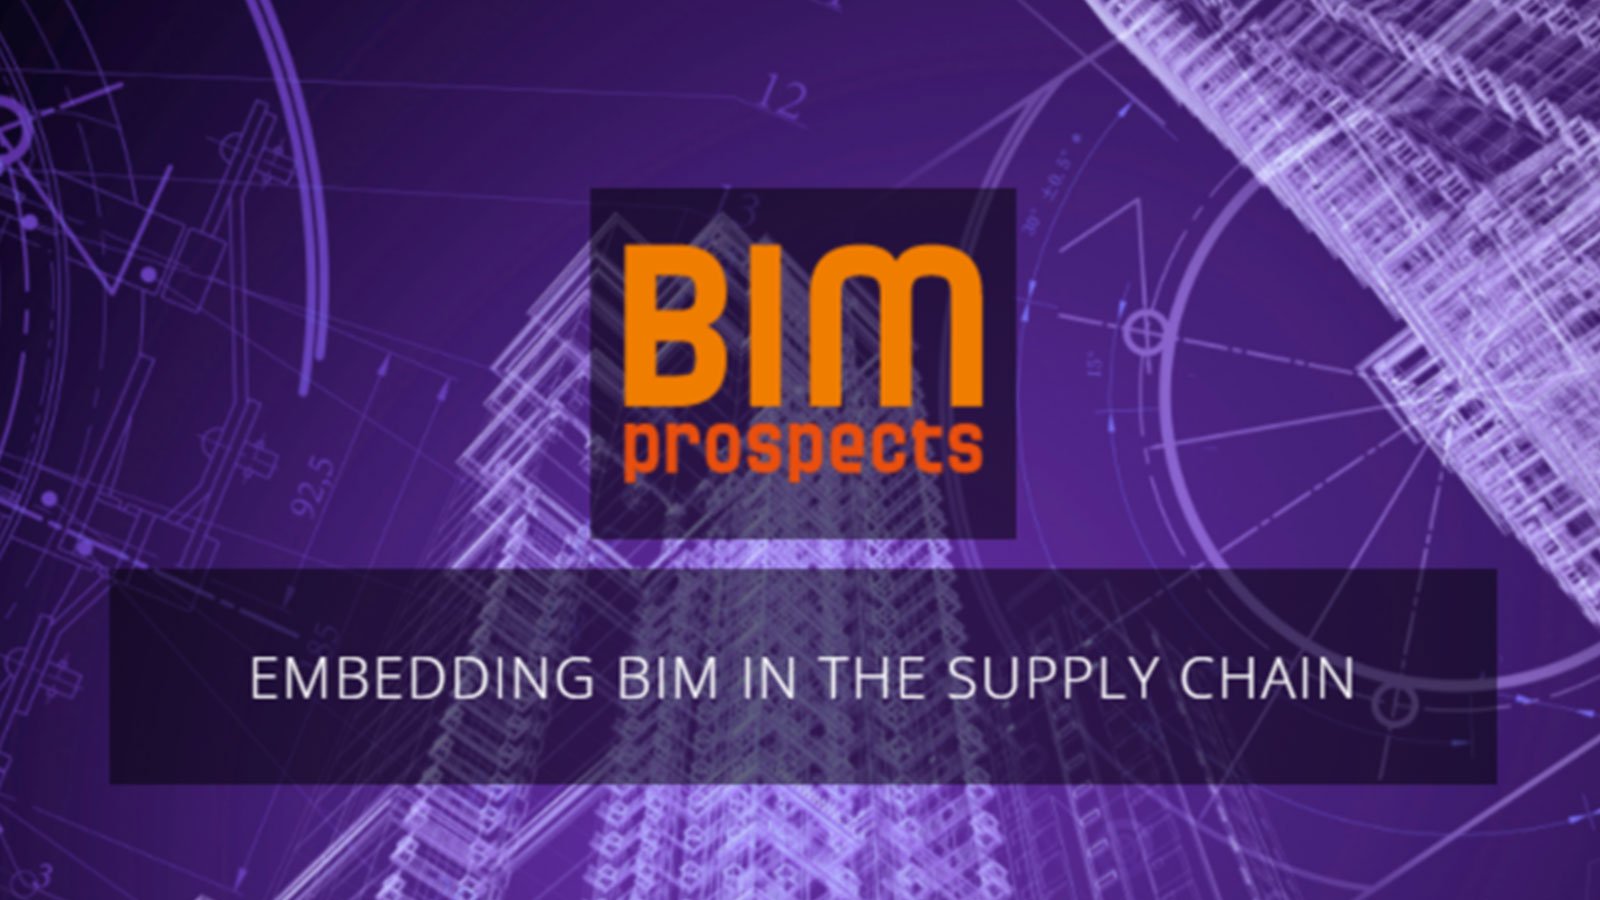 Asite’s Ateam will be exhibiting at BIM Prospects 2016, 6-7 April, BRE Watford, London, UK